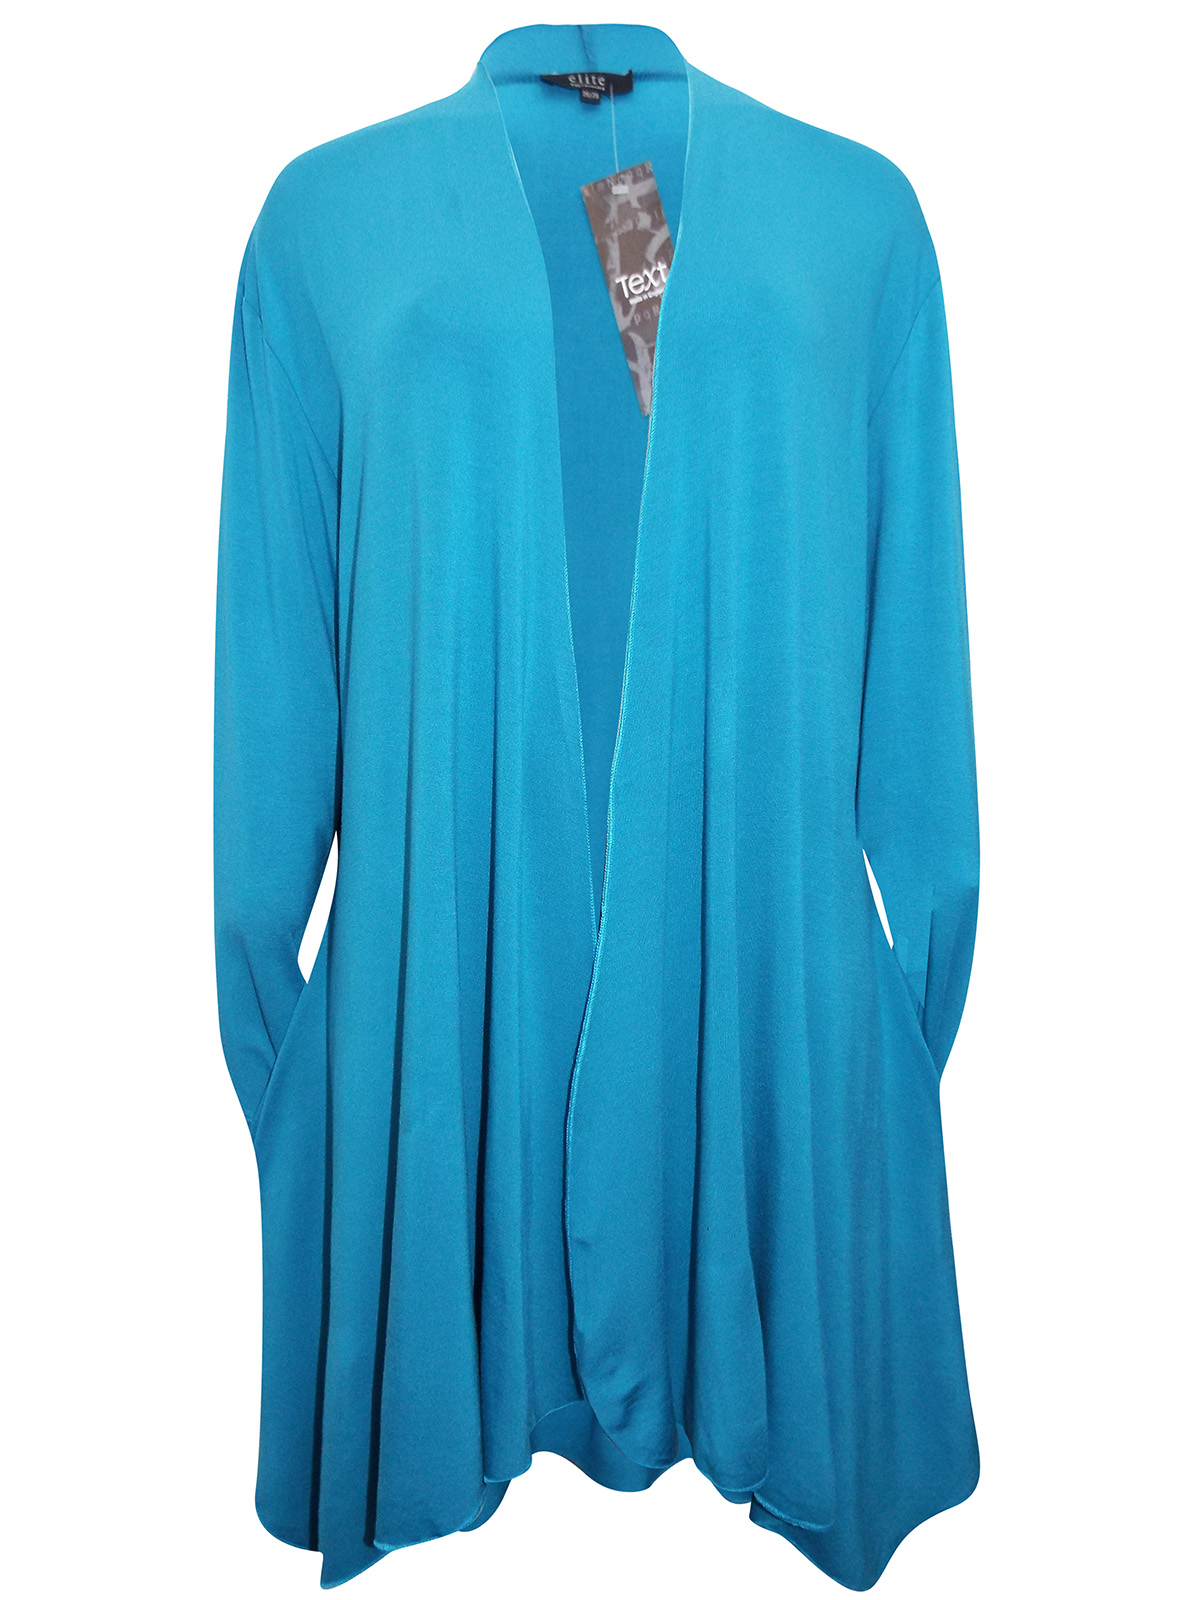 //text.. - - TURQUOISE Open Front Long Sleeve Jersey Cardigan w/Pockets ...